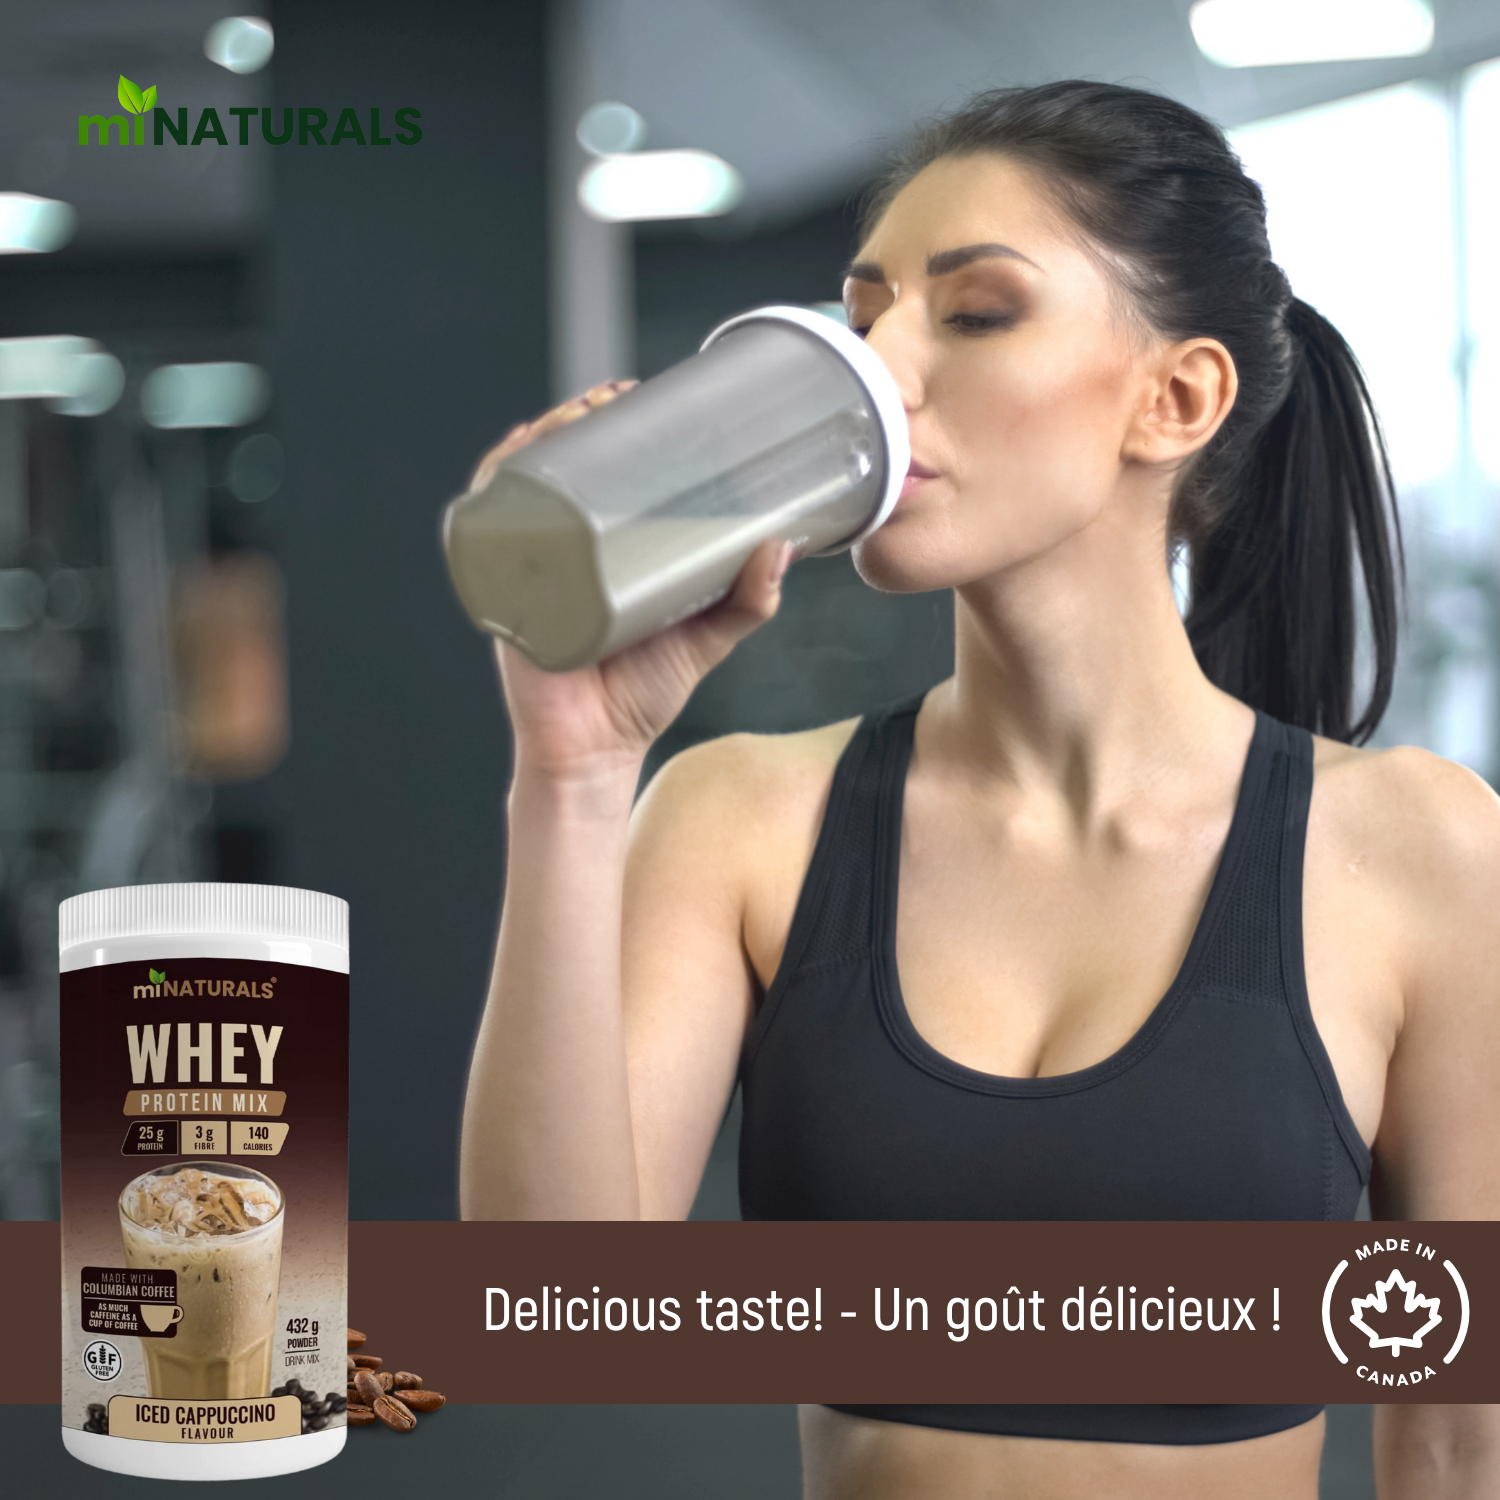 Whey High Protein Drink Mix - Iced Cappuccino Flavour